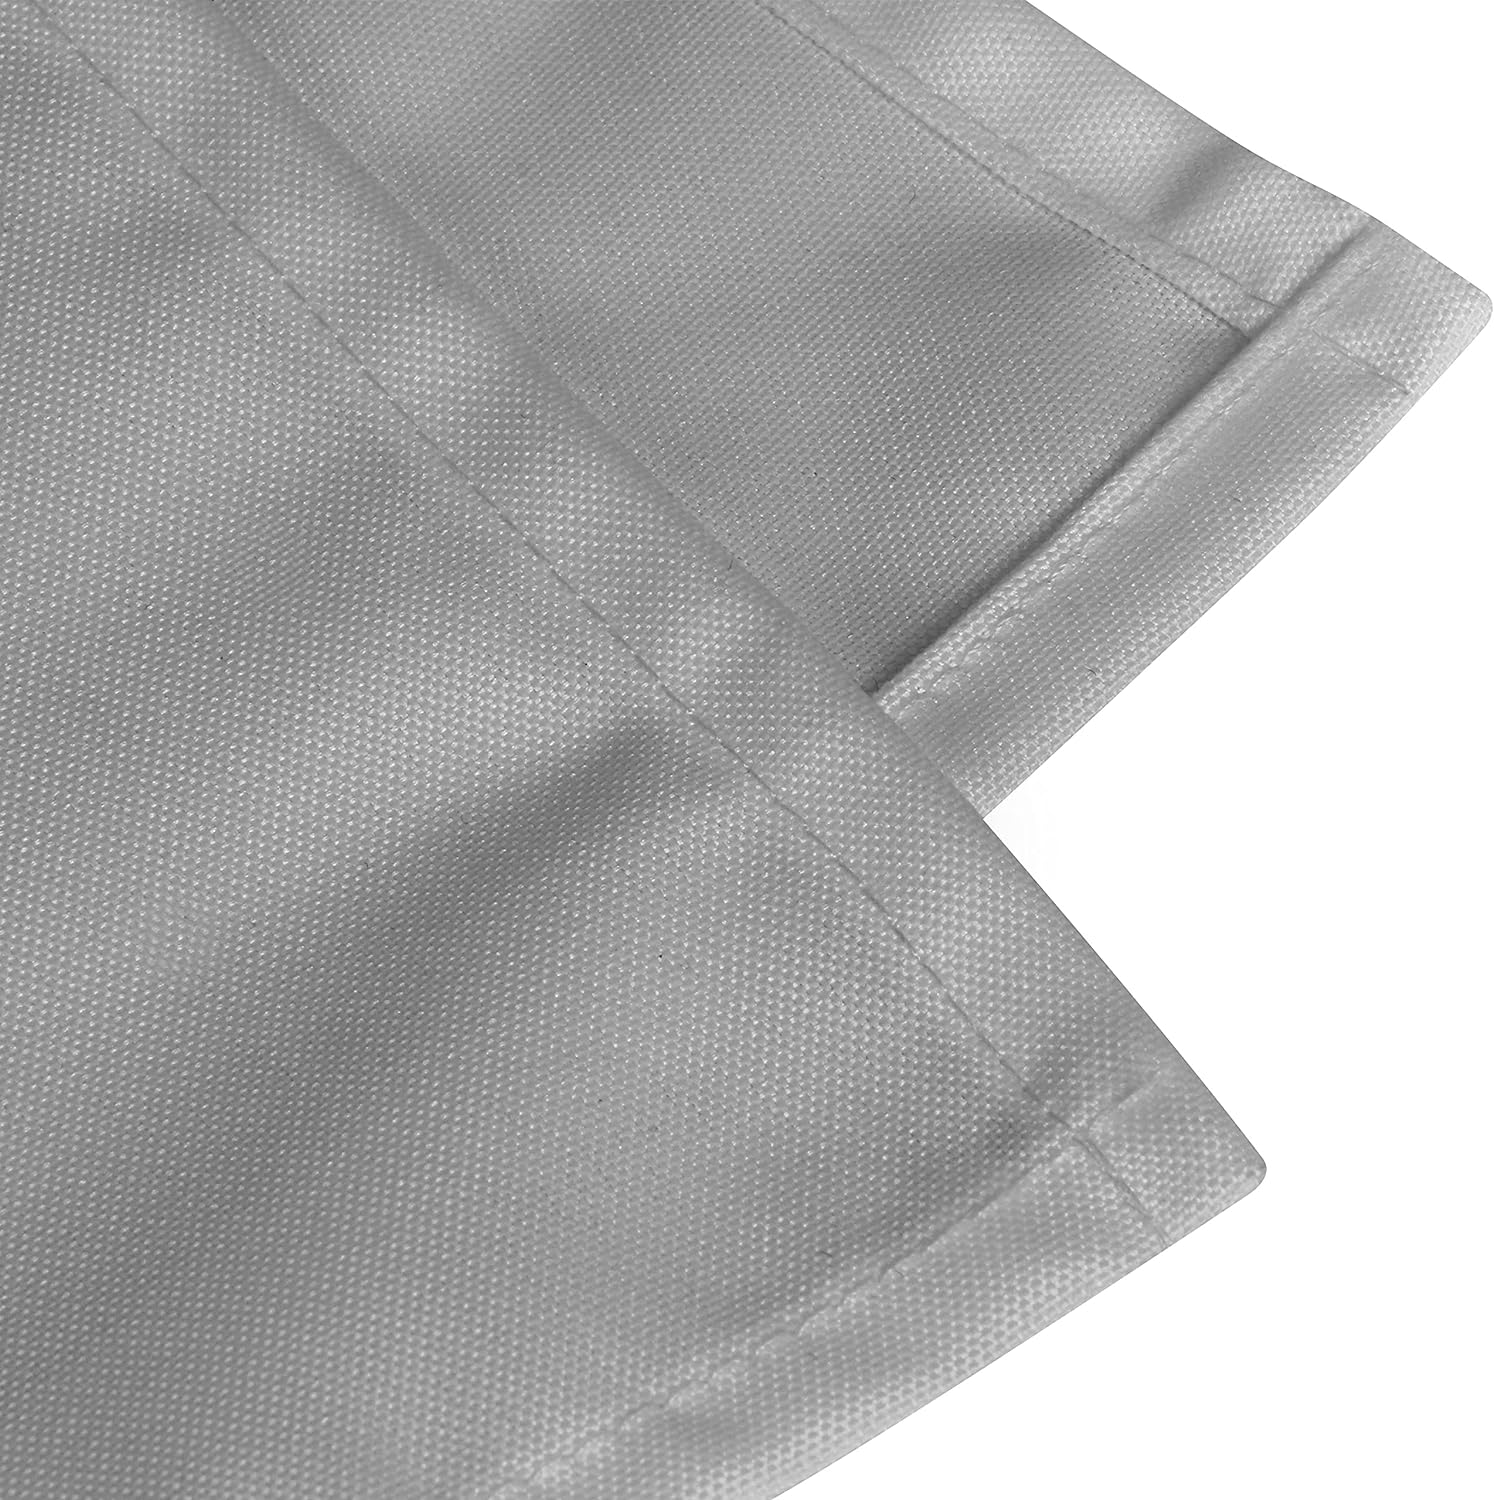  Utopia Home [24 Pack, White] Cloth Napkins 17x17 Inches, 100%  Polyester Dinner Napkins with Hemmed Edges, Washable Napkins Ideal for  Parties, Weddings and Dinners : Home & Kitchen